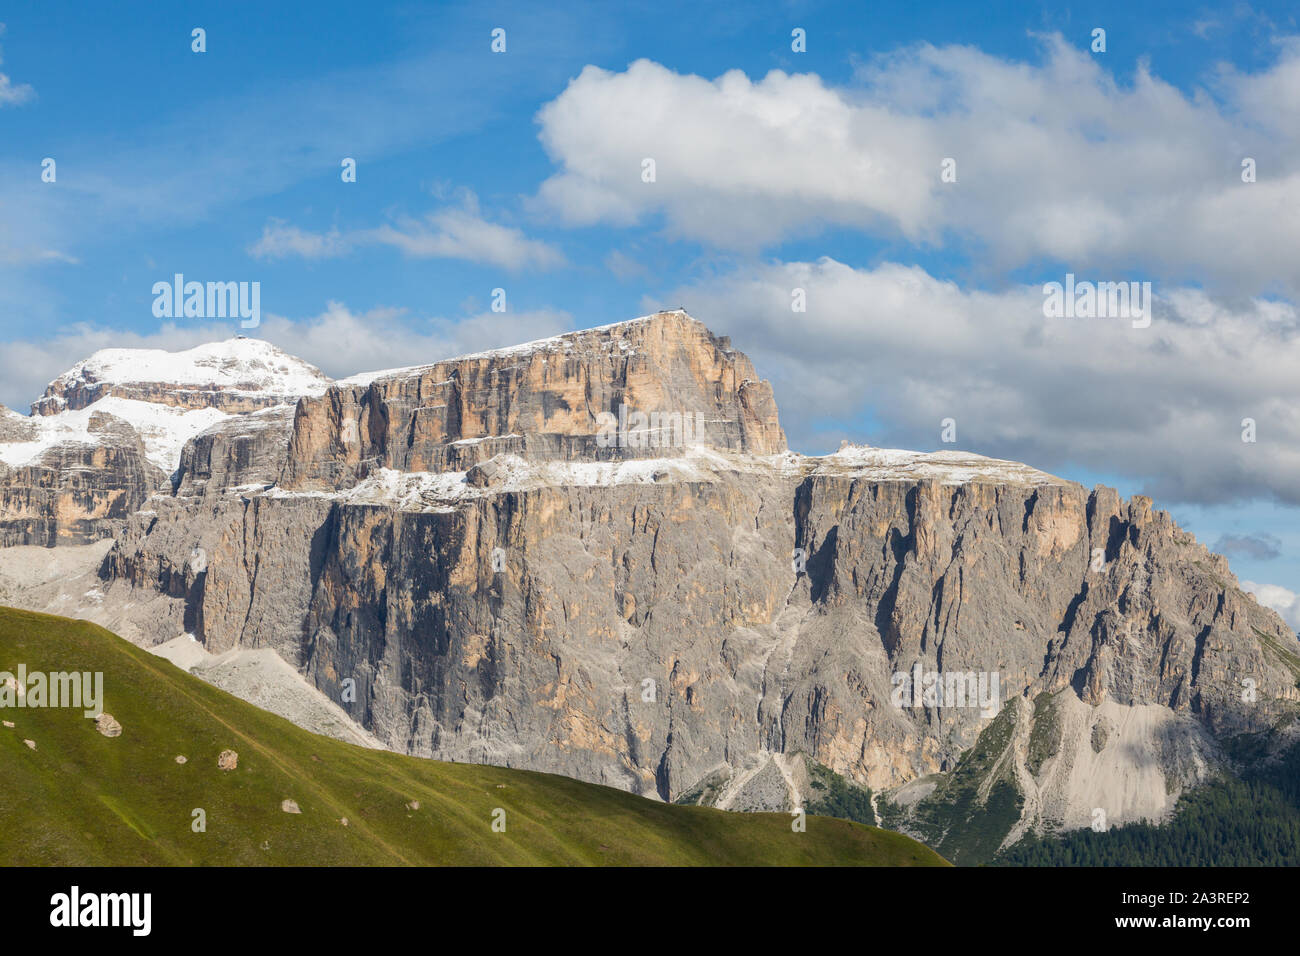 snow-capped Piz Boe mountain of Sella group in  Dolomites, cloudy blue sky Stock Photo